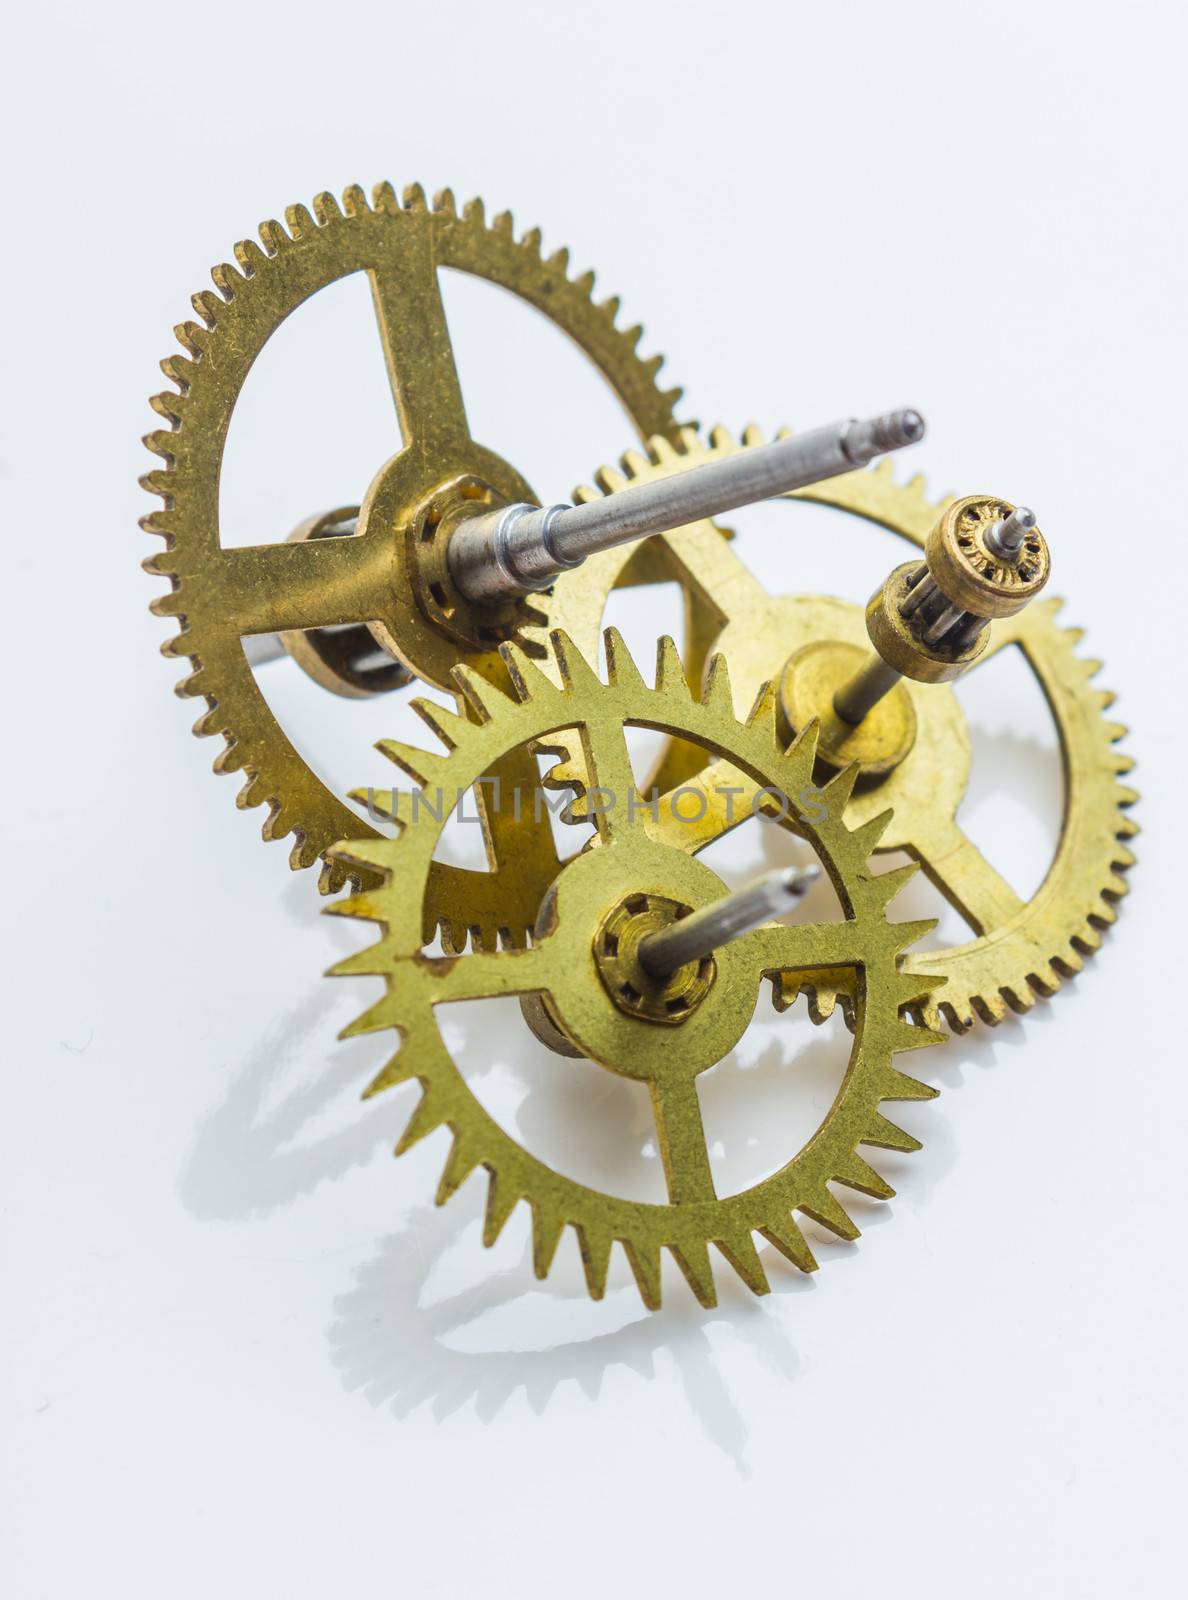 Gear of the clock on a white background